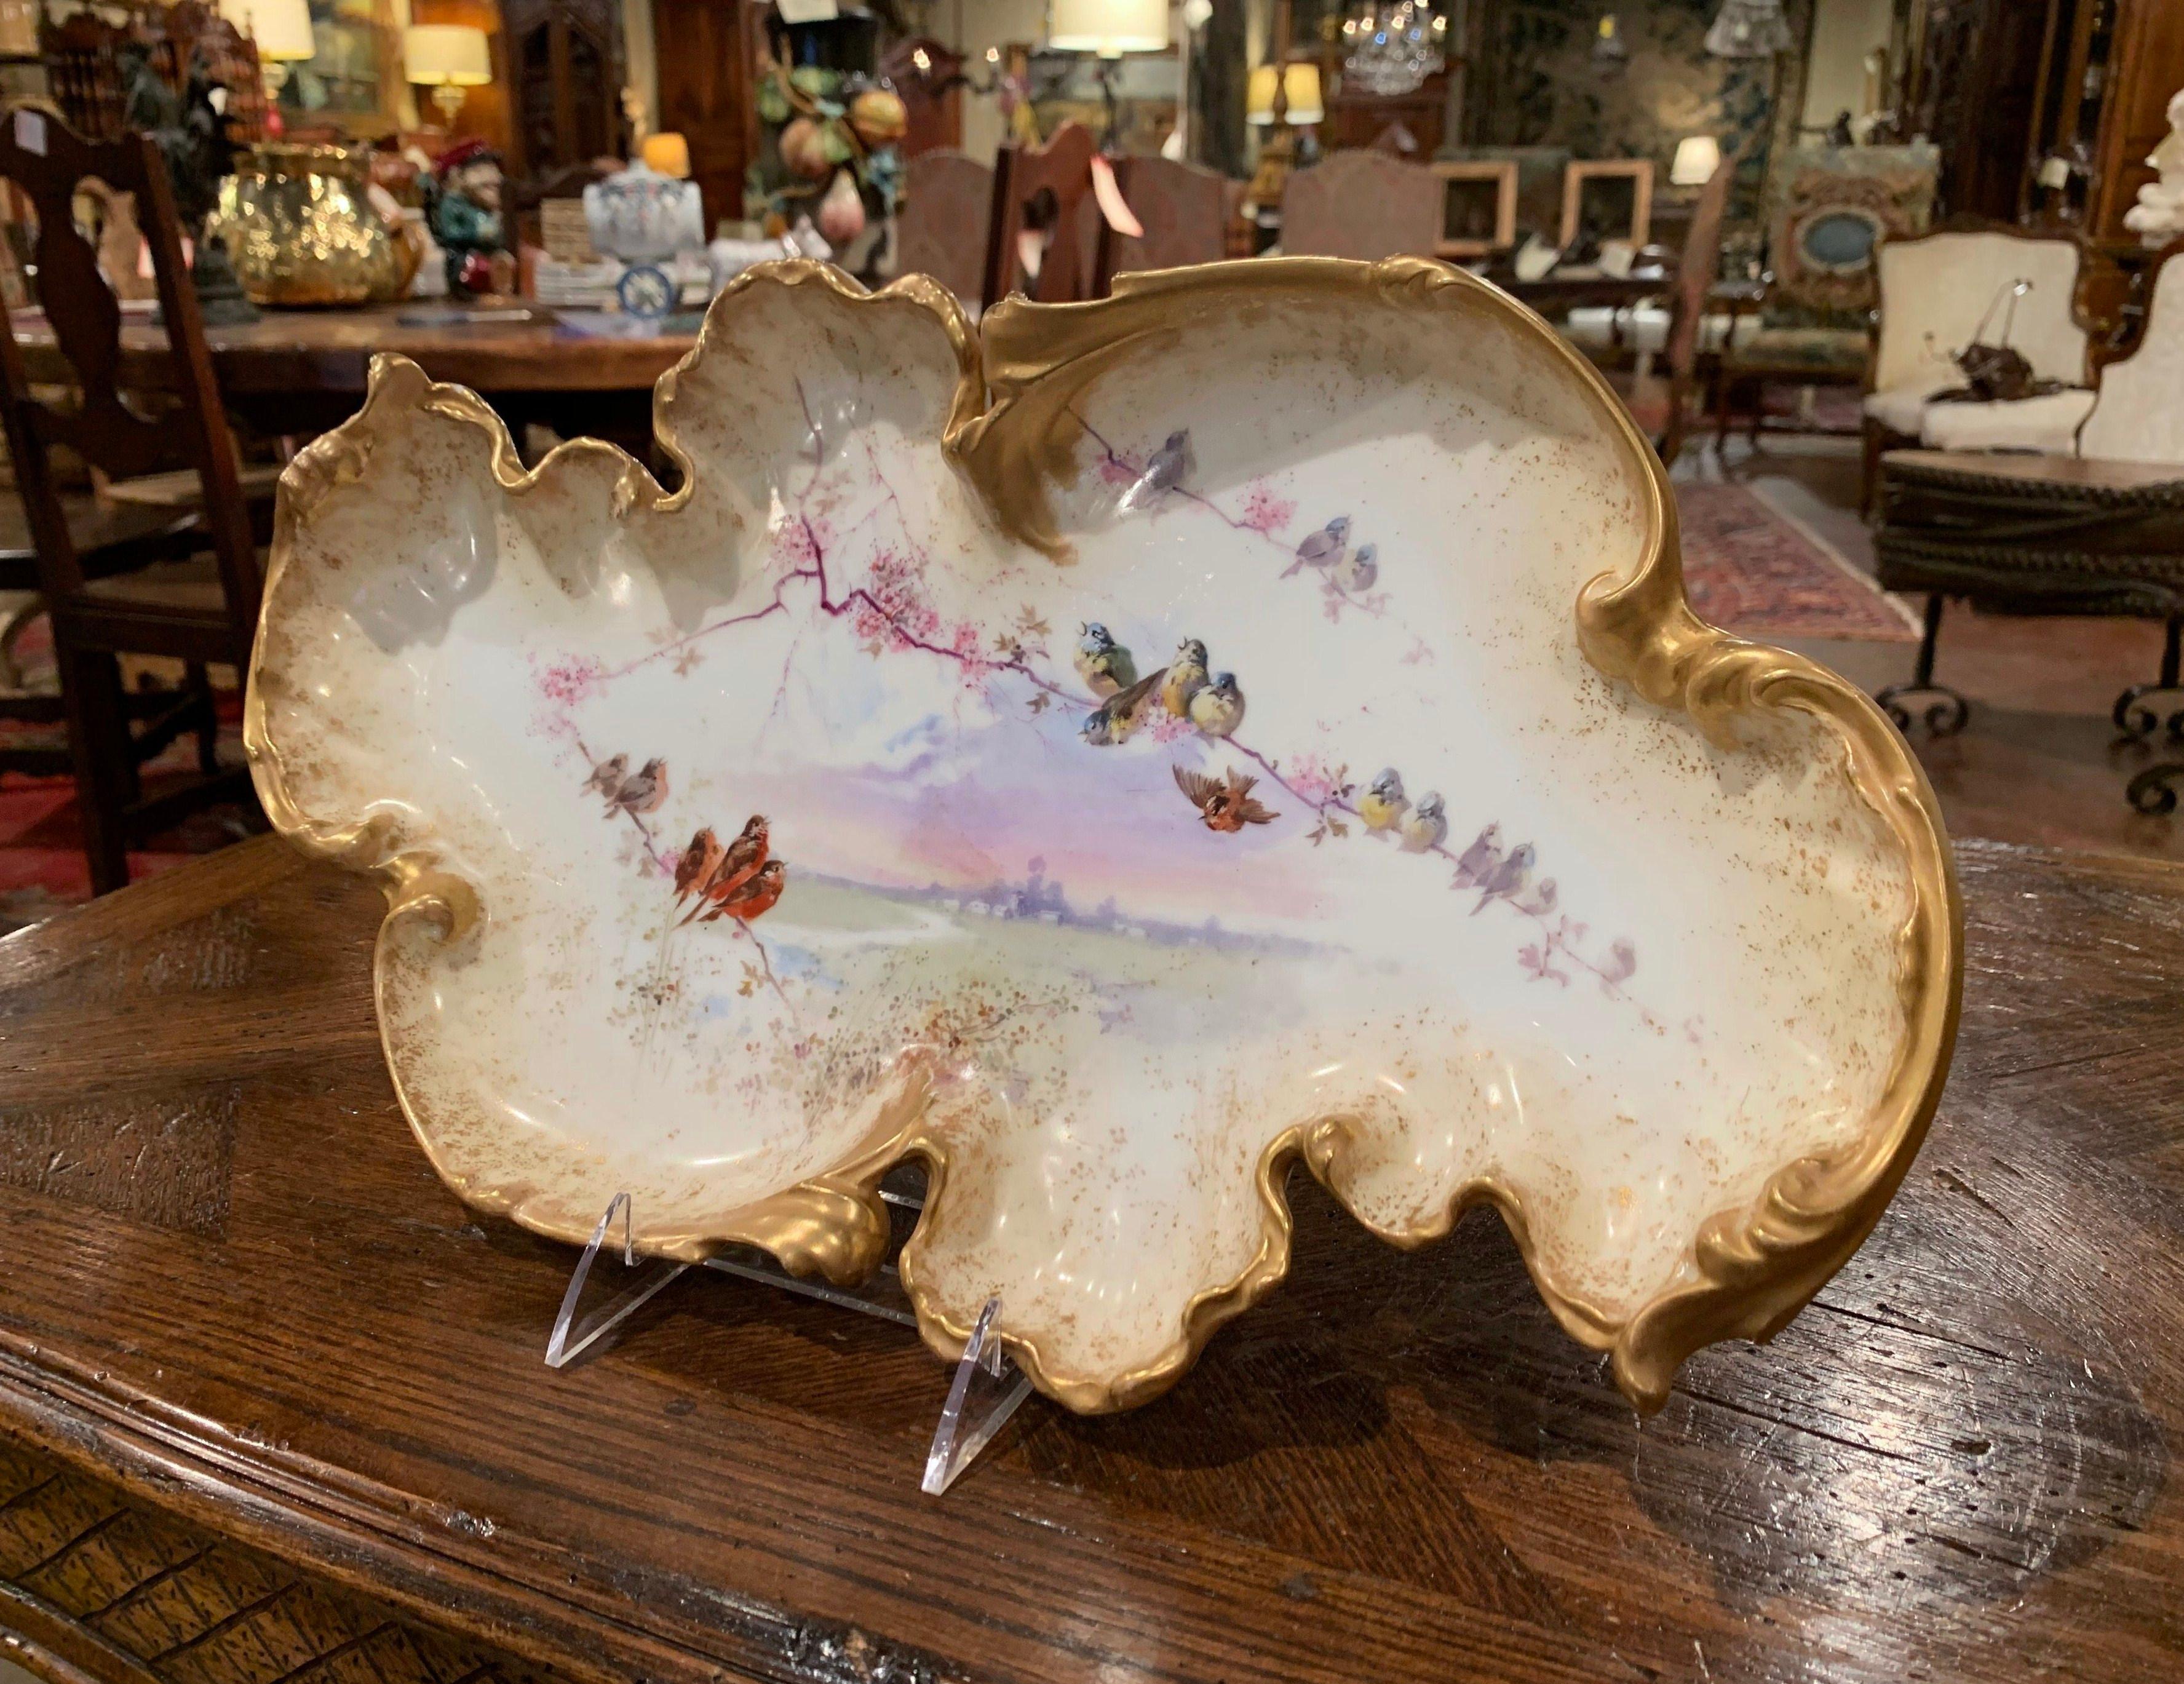 This elegant Napoleon III antique dish was crafted in France, circa 1870. The 